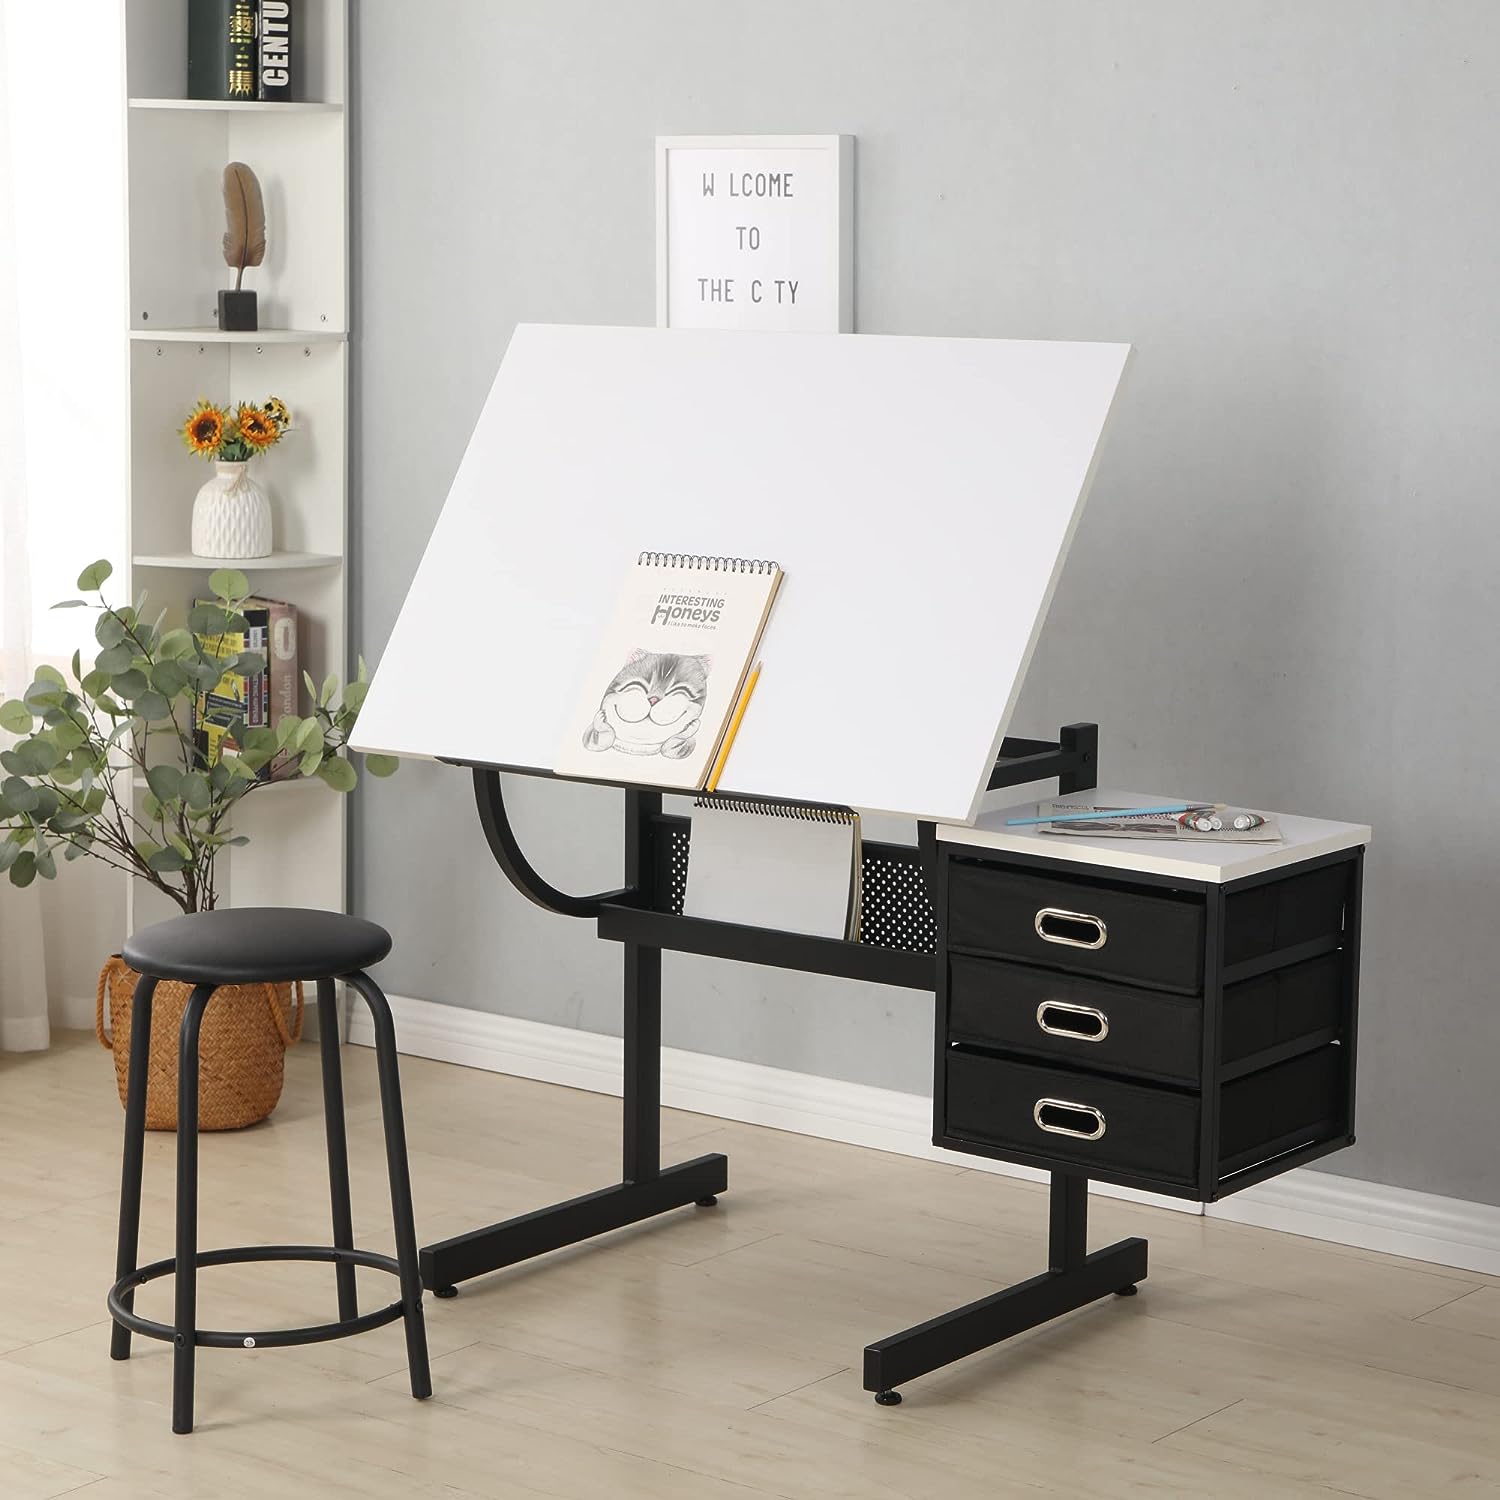 LAEKER Adjustable Drafting Drawing Table with Stool and 3 Drawers-White